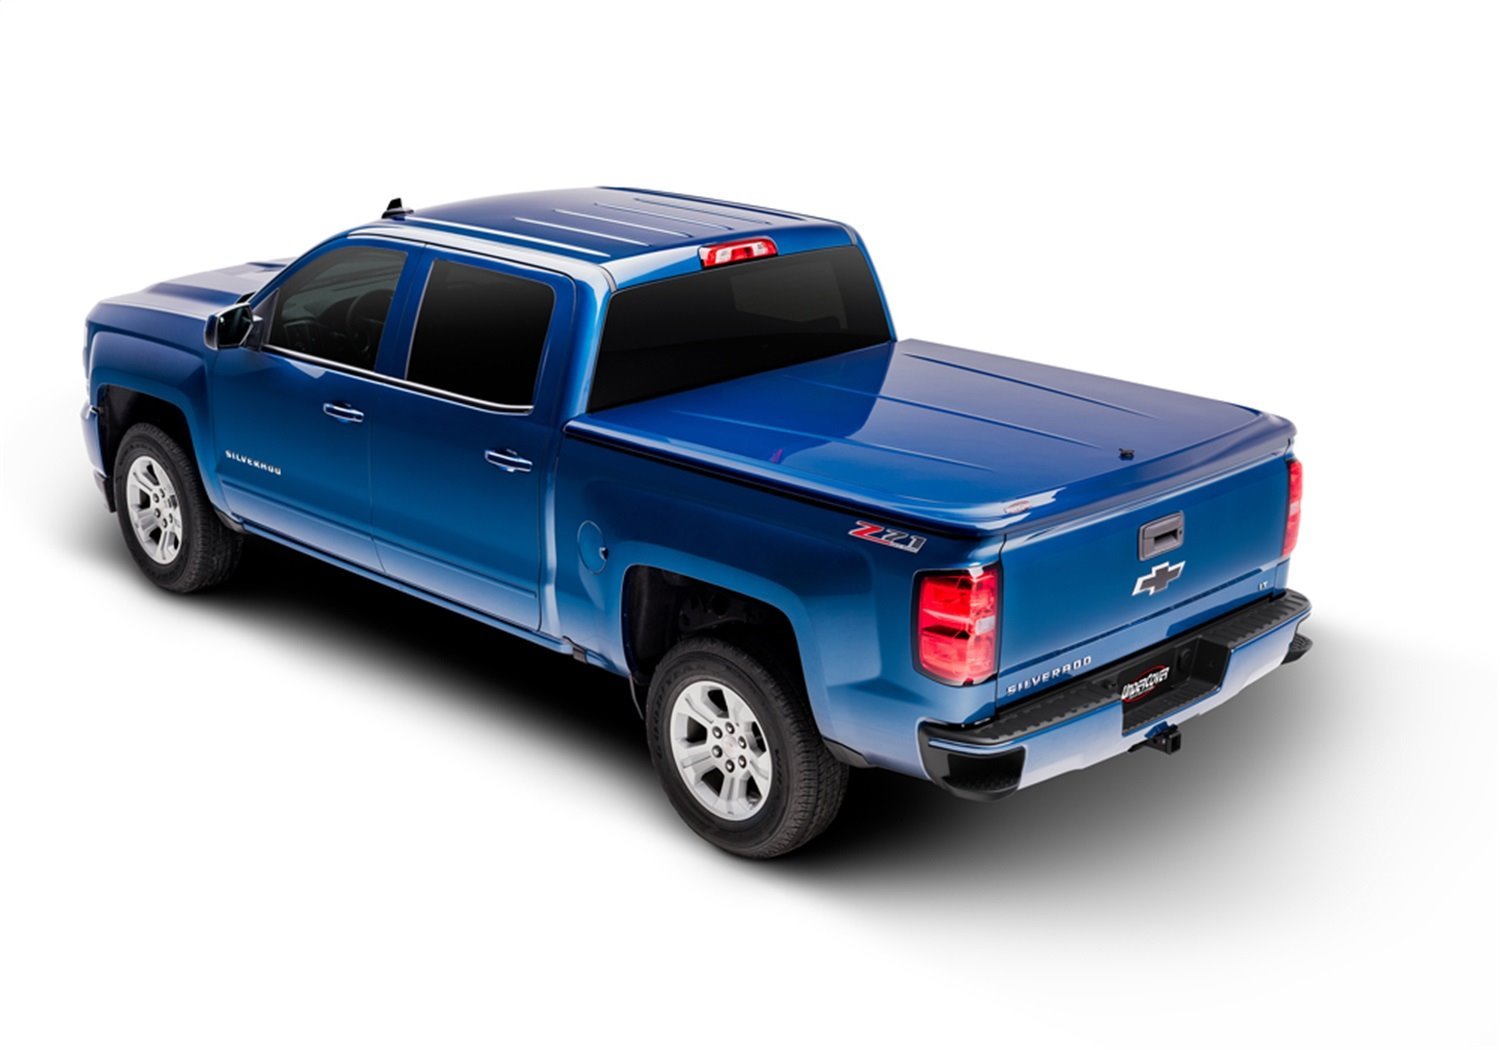 UC2206L-AZ LUX Hard Non-Folding Cover, Fits Select Ford F-150 5'7" Bed Crew (Includes Lightning) AZ Star White Tricoat